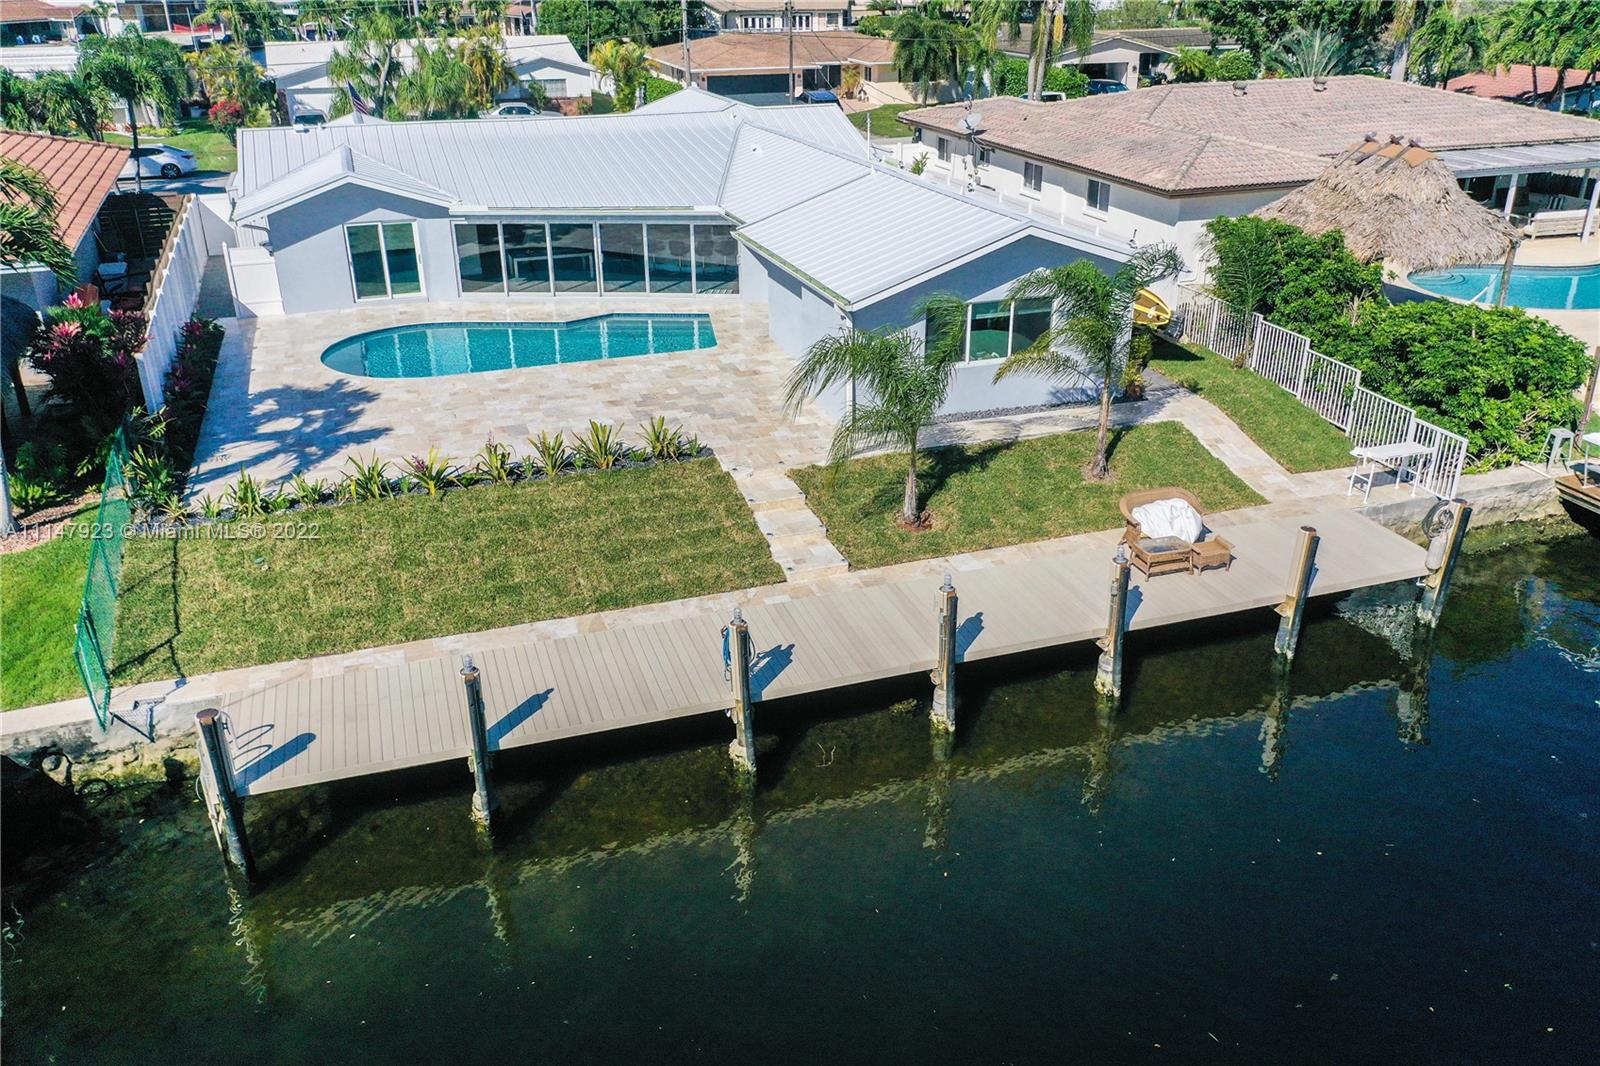 Beautiful 4/3 Waterfront Home 2297sqft (see Office Remarks), which includes an In-Law suite with a private entrance that has all been completely remodeled in 2020/2021. New Aluminum Roof, Plumbing & Fixtures, Electric, Kitchen, Appliances, HVAC, Pavers in Front & Backyard, Pool, Dock, Wooden Shaker Cabinets & Quartzite Countertops in Kitchen and Bathrooms, Flooring, Motorized Blinds, Impact Windows & Doors, Irrigation, Landscaping, Garage Cabinetry & Flooring, Dock & (10) Camera Security System. List price includes furniture as seen in the pictures. The In-Law suite is on a split HVAC system with separate thermostat, kitchen & a modern Murphy Bed that converts into a couch when not in use as a bed, currently tenant occupied $1200/month, lease expires 02/28/22.